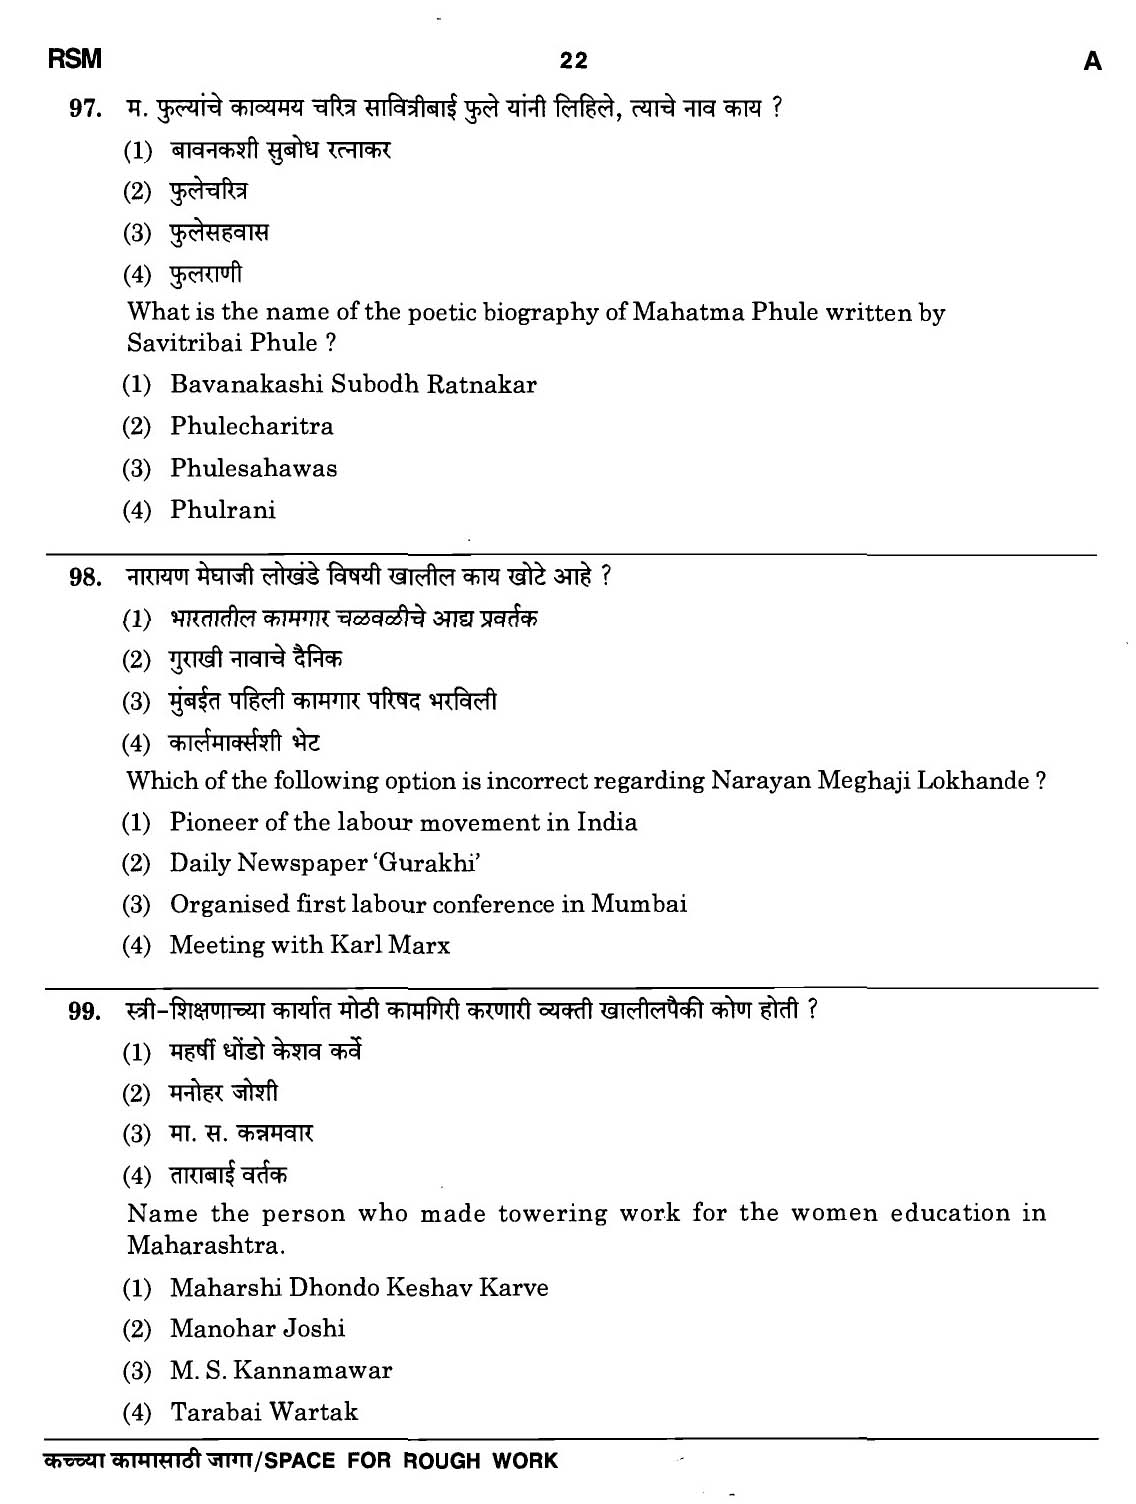 MPSC Agricultural Services Preliminary Exam 2011 Question Paper 21